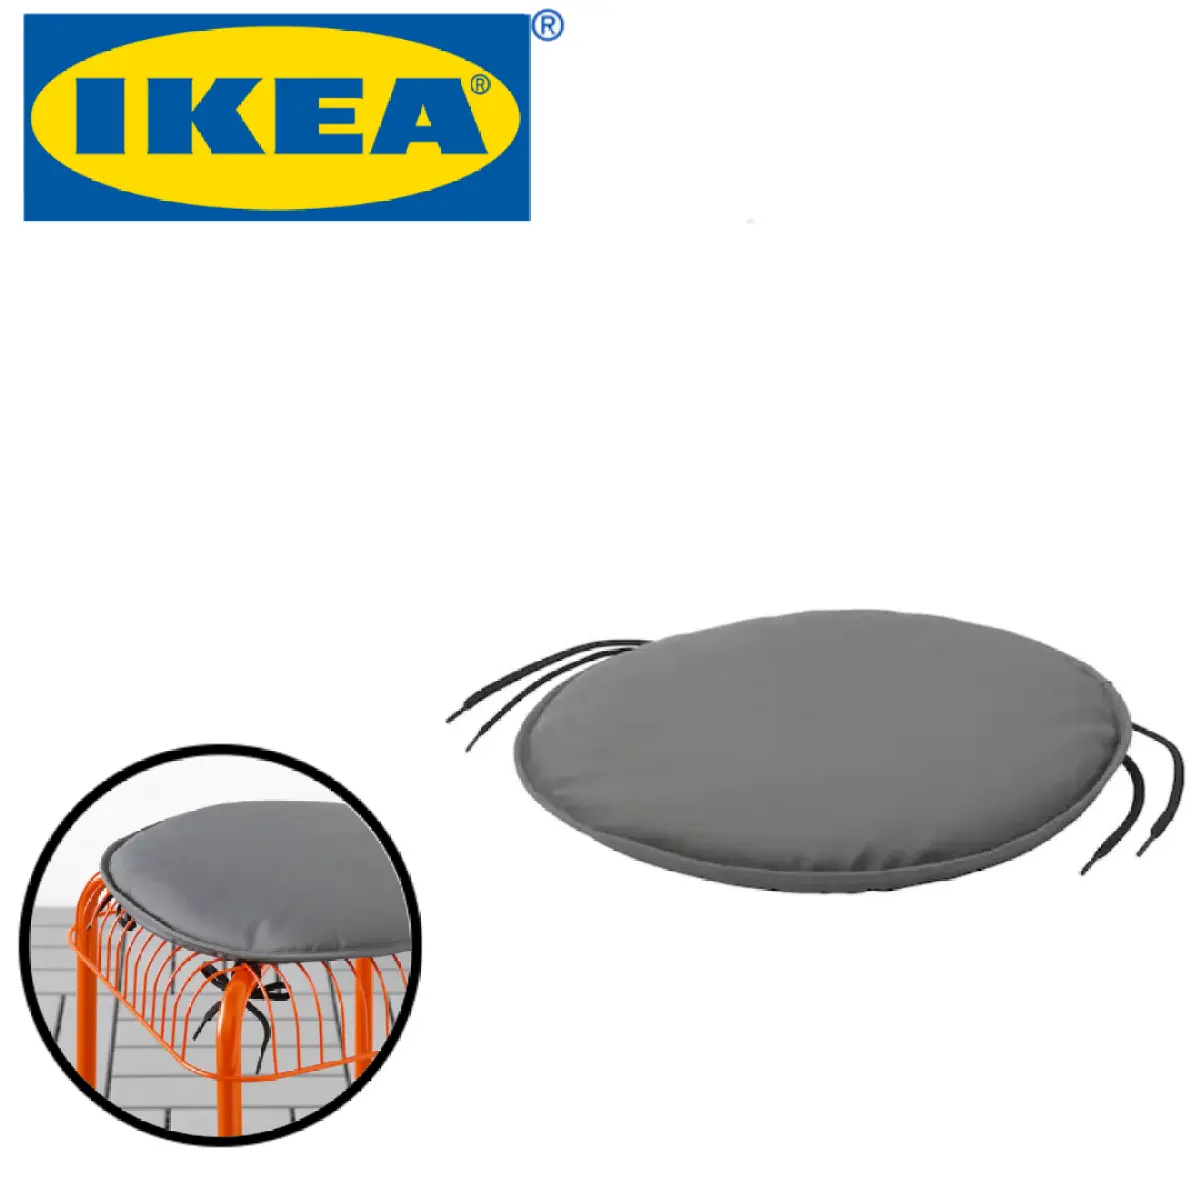 Ikea Beno 100 Polyester Round Chair Pad Comfort And Long Lasting Soft Seat Cushions For Chairs Indoor Outdoor Use Chair Pad Chair Cushion Chair Pad Cushion Chair Pad Ikea Lazada